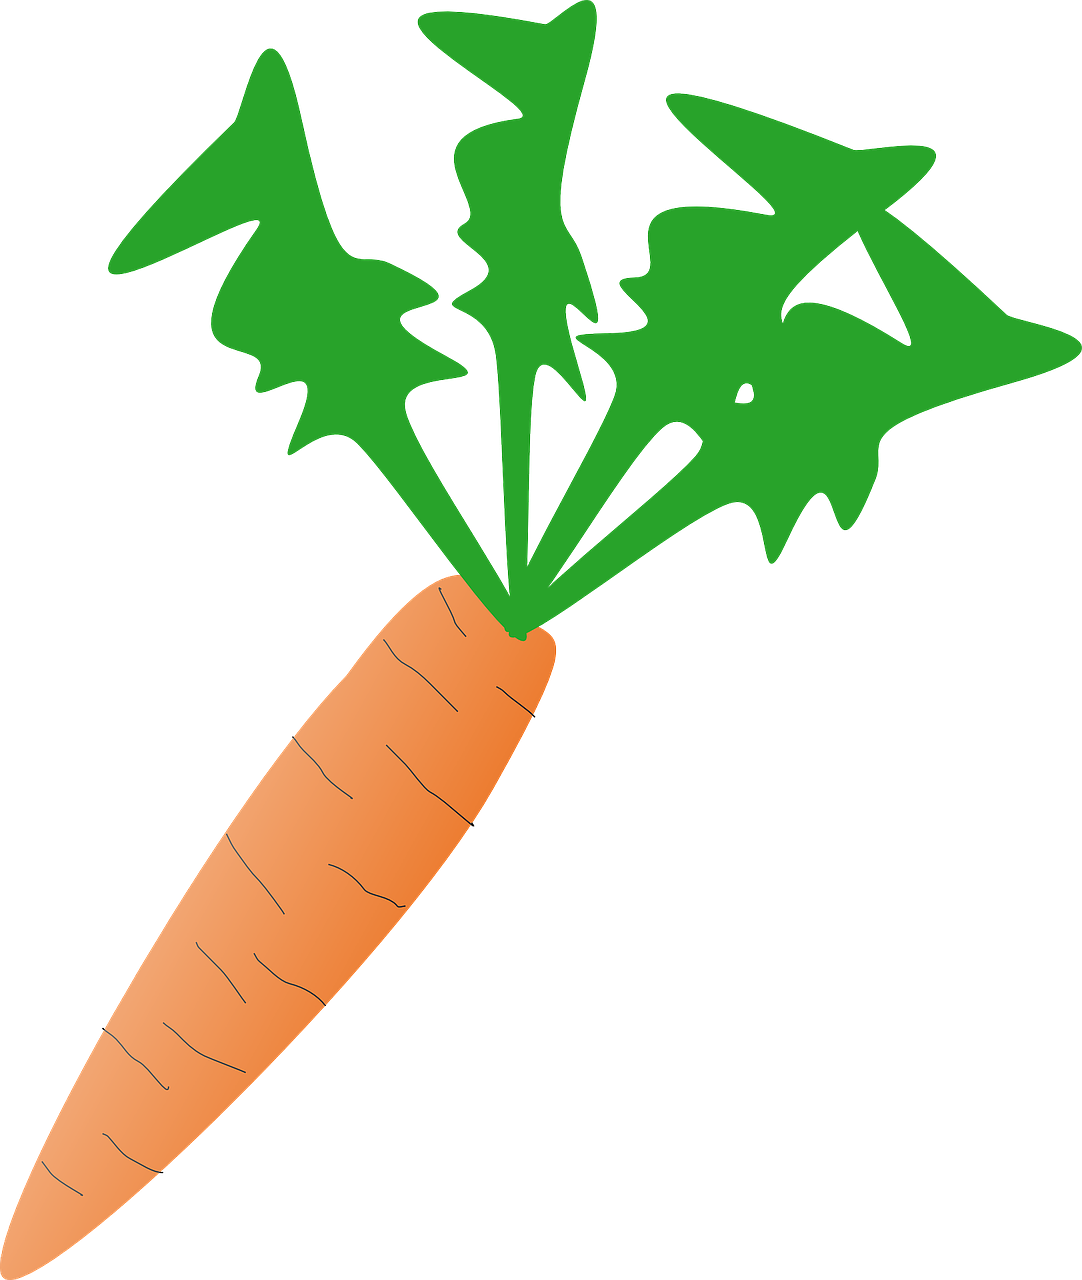 carrot,vegetable,fresh,healthy,organic,raw,free vector graphics,free pictures, free photos, free images, royalty free, free illustrations, public domain